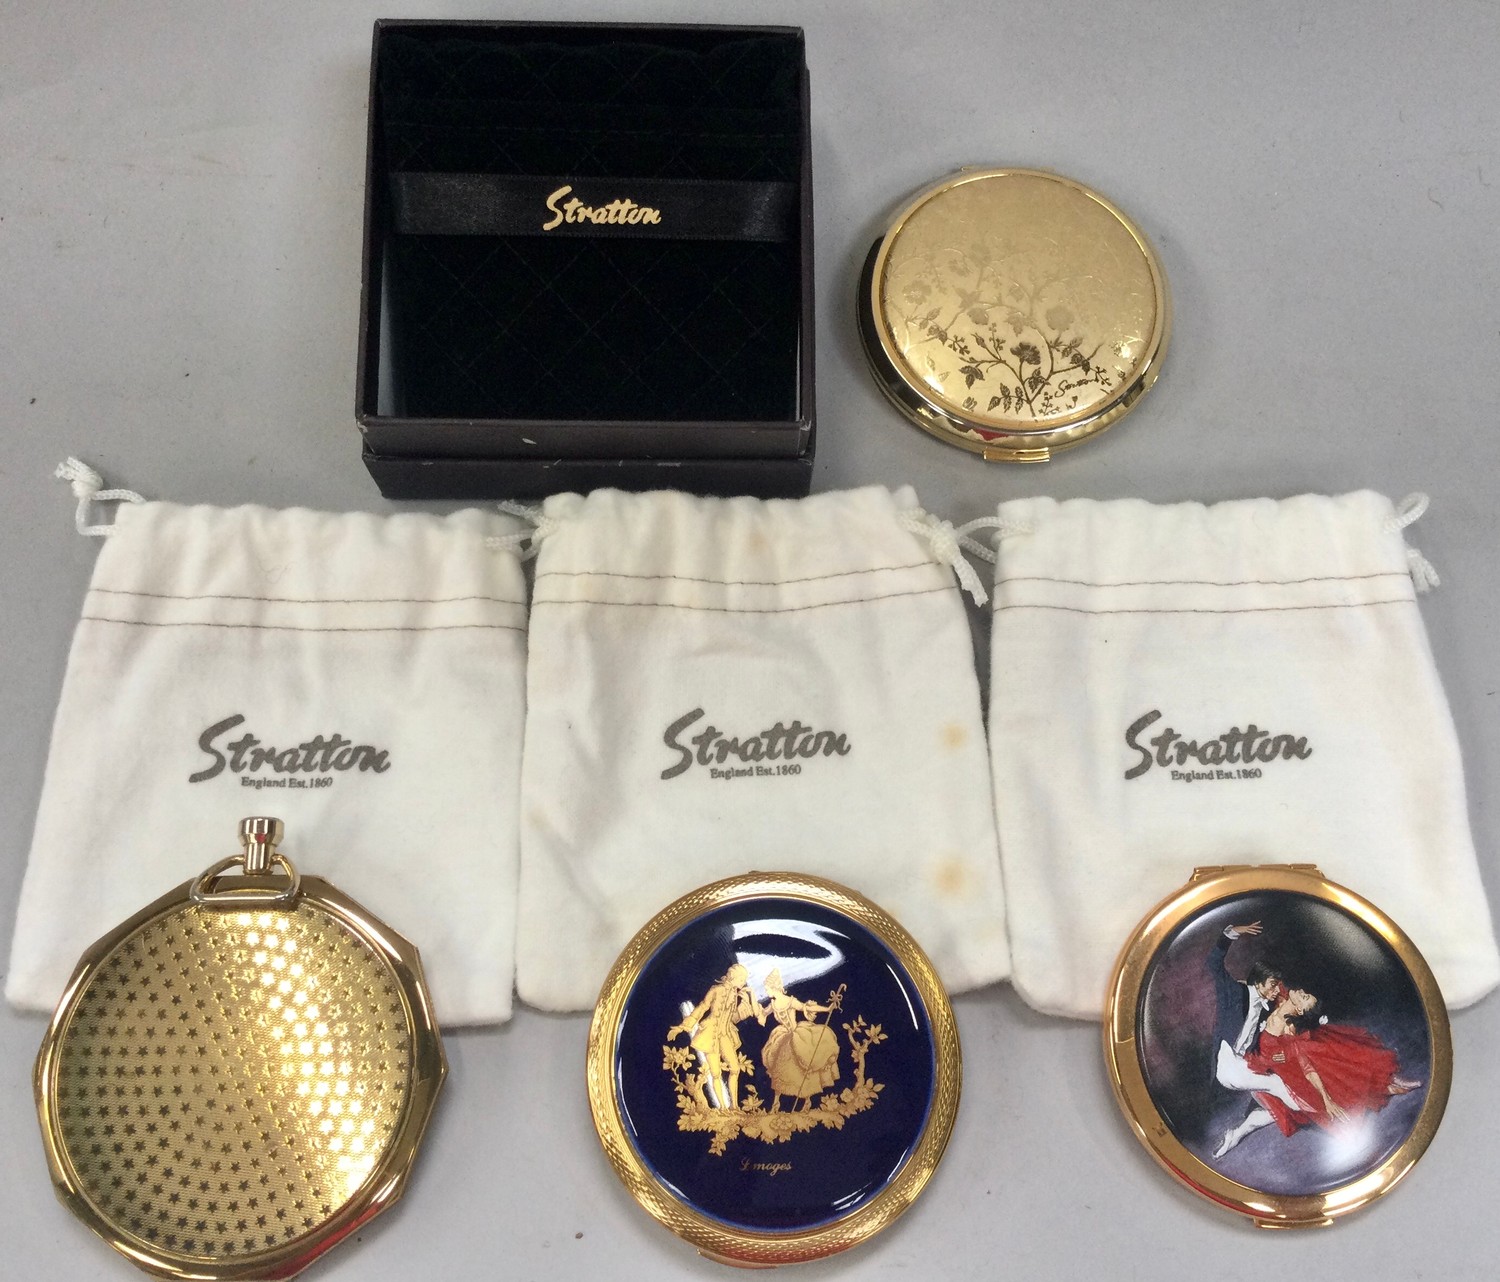 Stratton ladies compacts x4, three with cloth bags and one boxed.